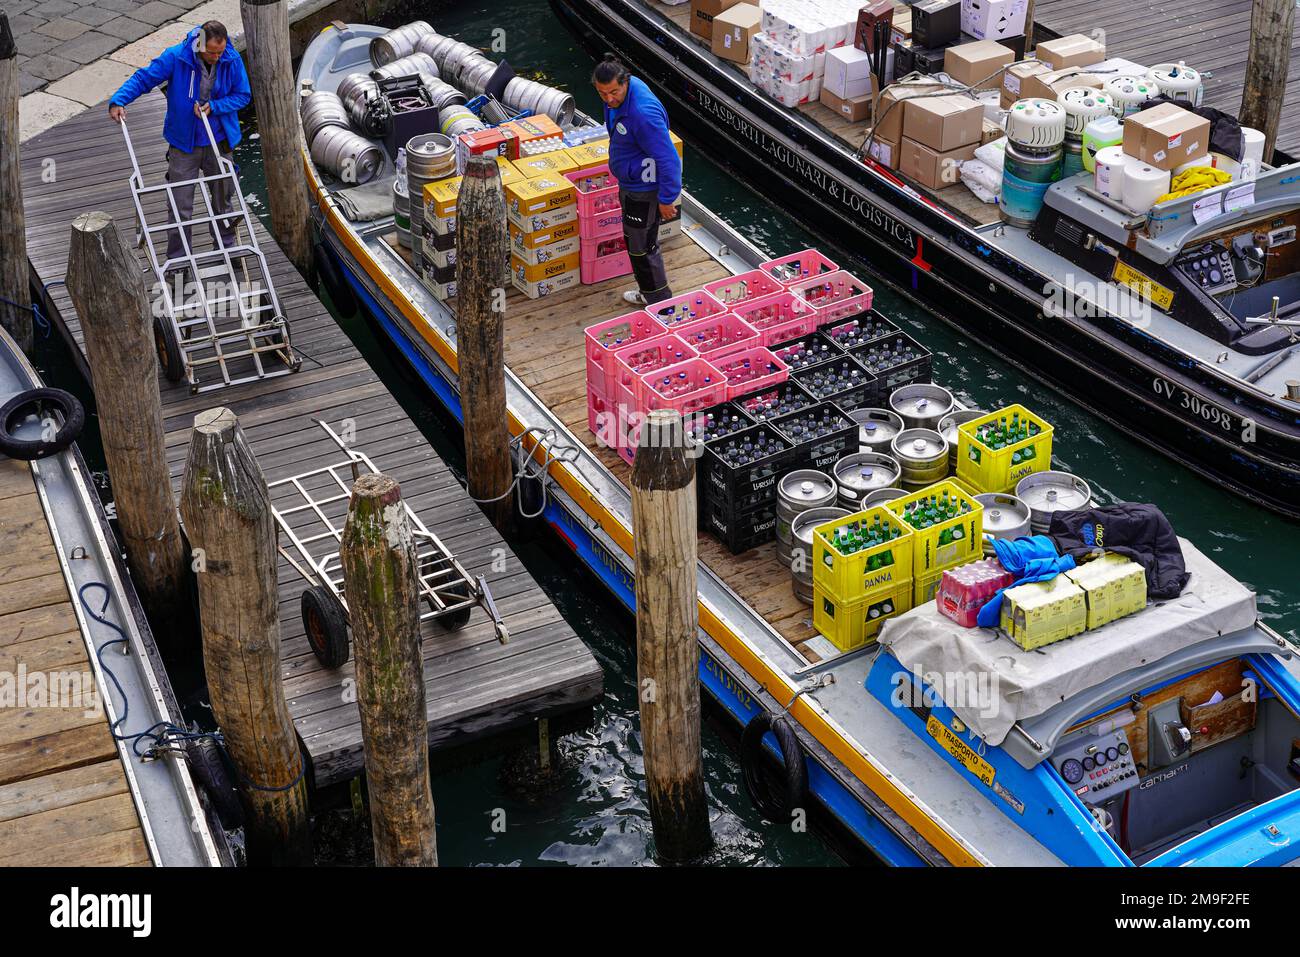 Boats of a beverage wholesaler have arrived at a trader on a canal in Venice. Barrels and bottled drinks are being delivered. Stock Photo